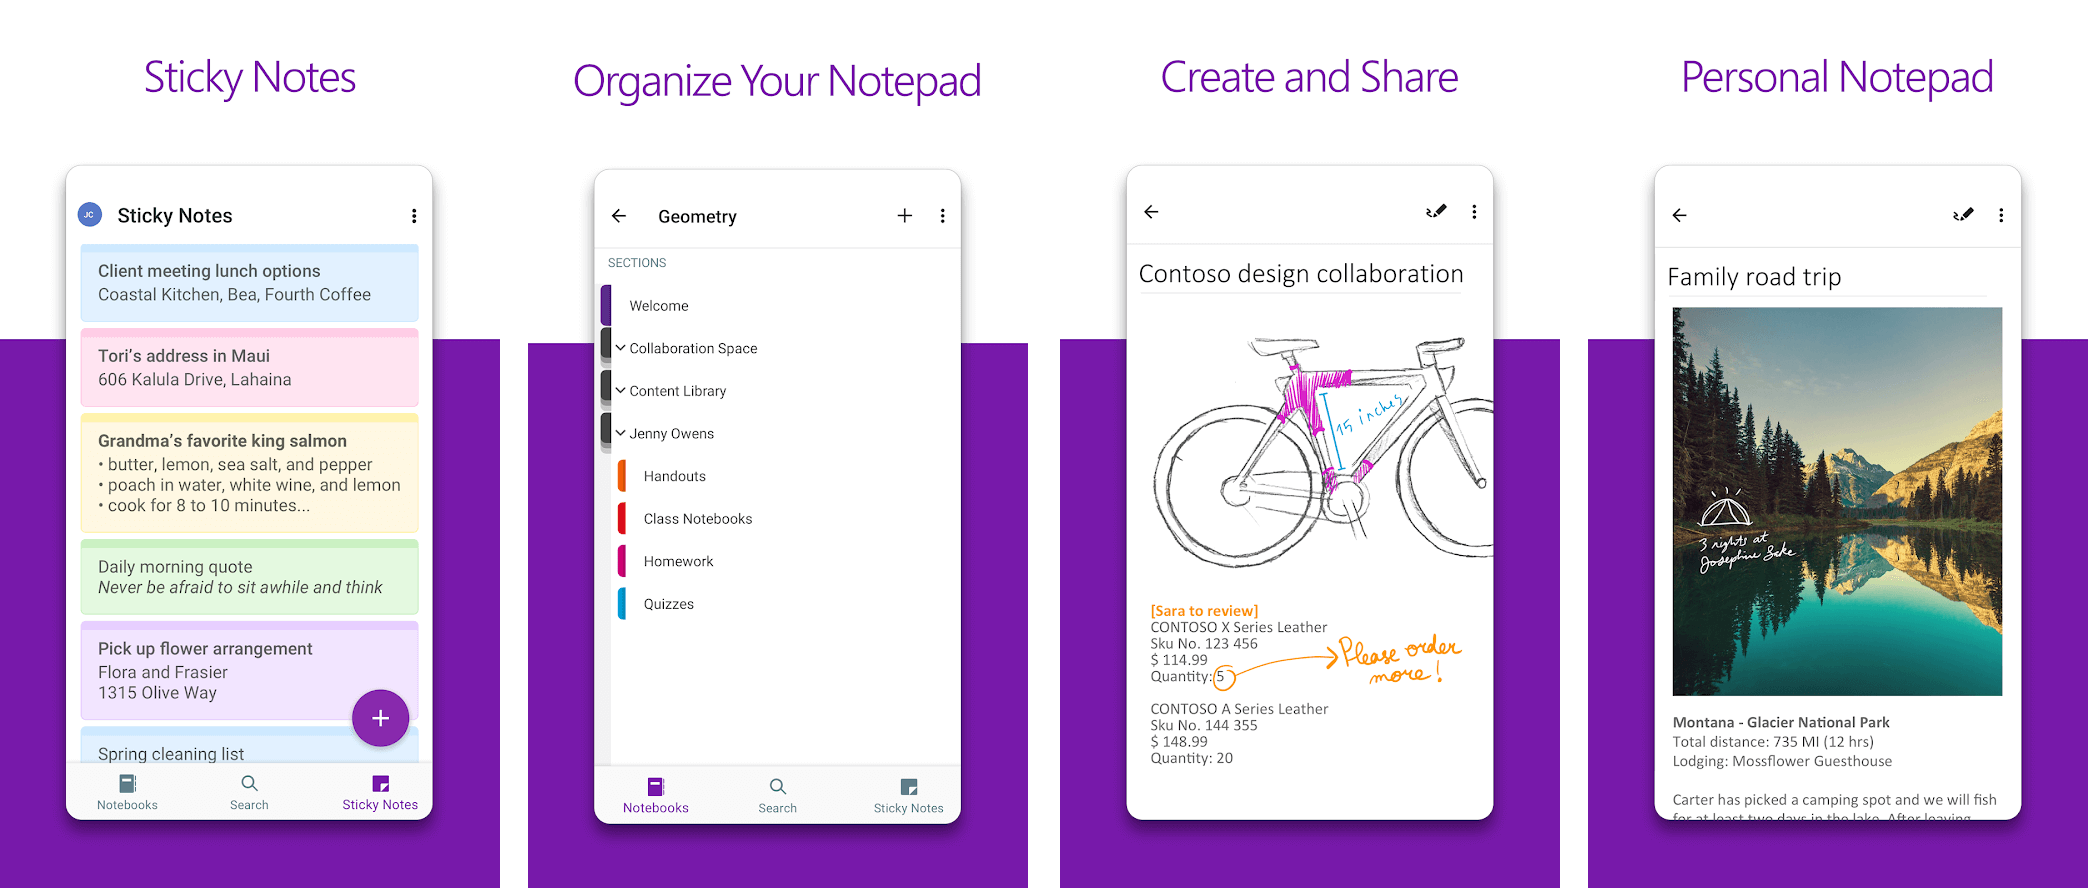 Microsoft OneNote notes taking app for Android